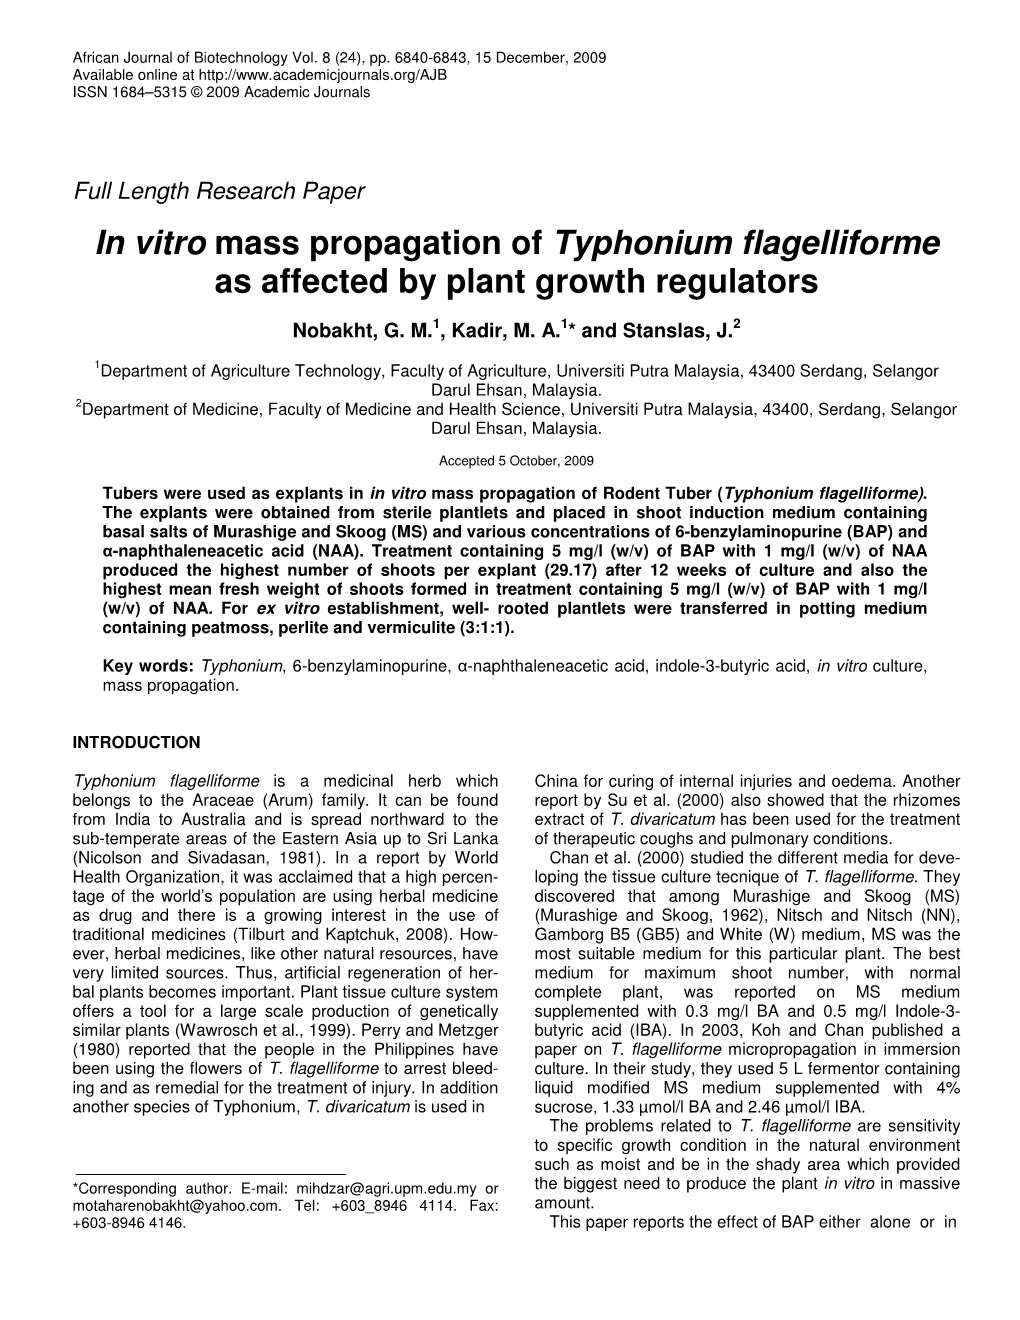 In Vitro Mass Propagation of Typhonium Flagelliforme As Affected by Plant Growth Regulators